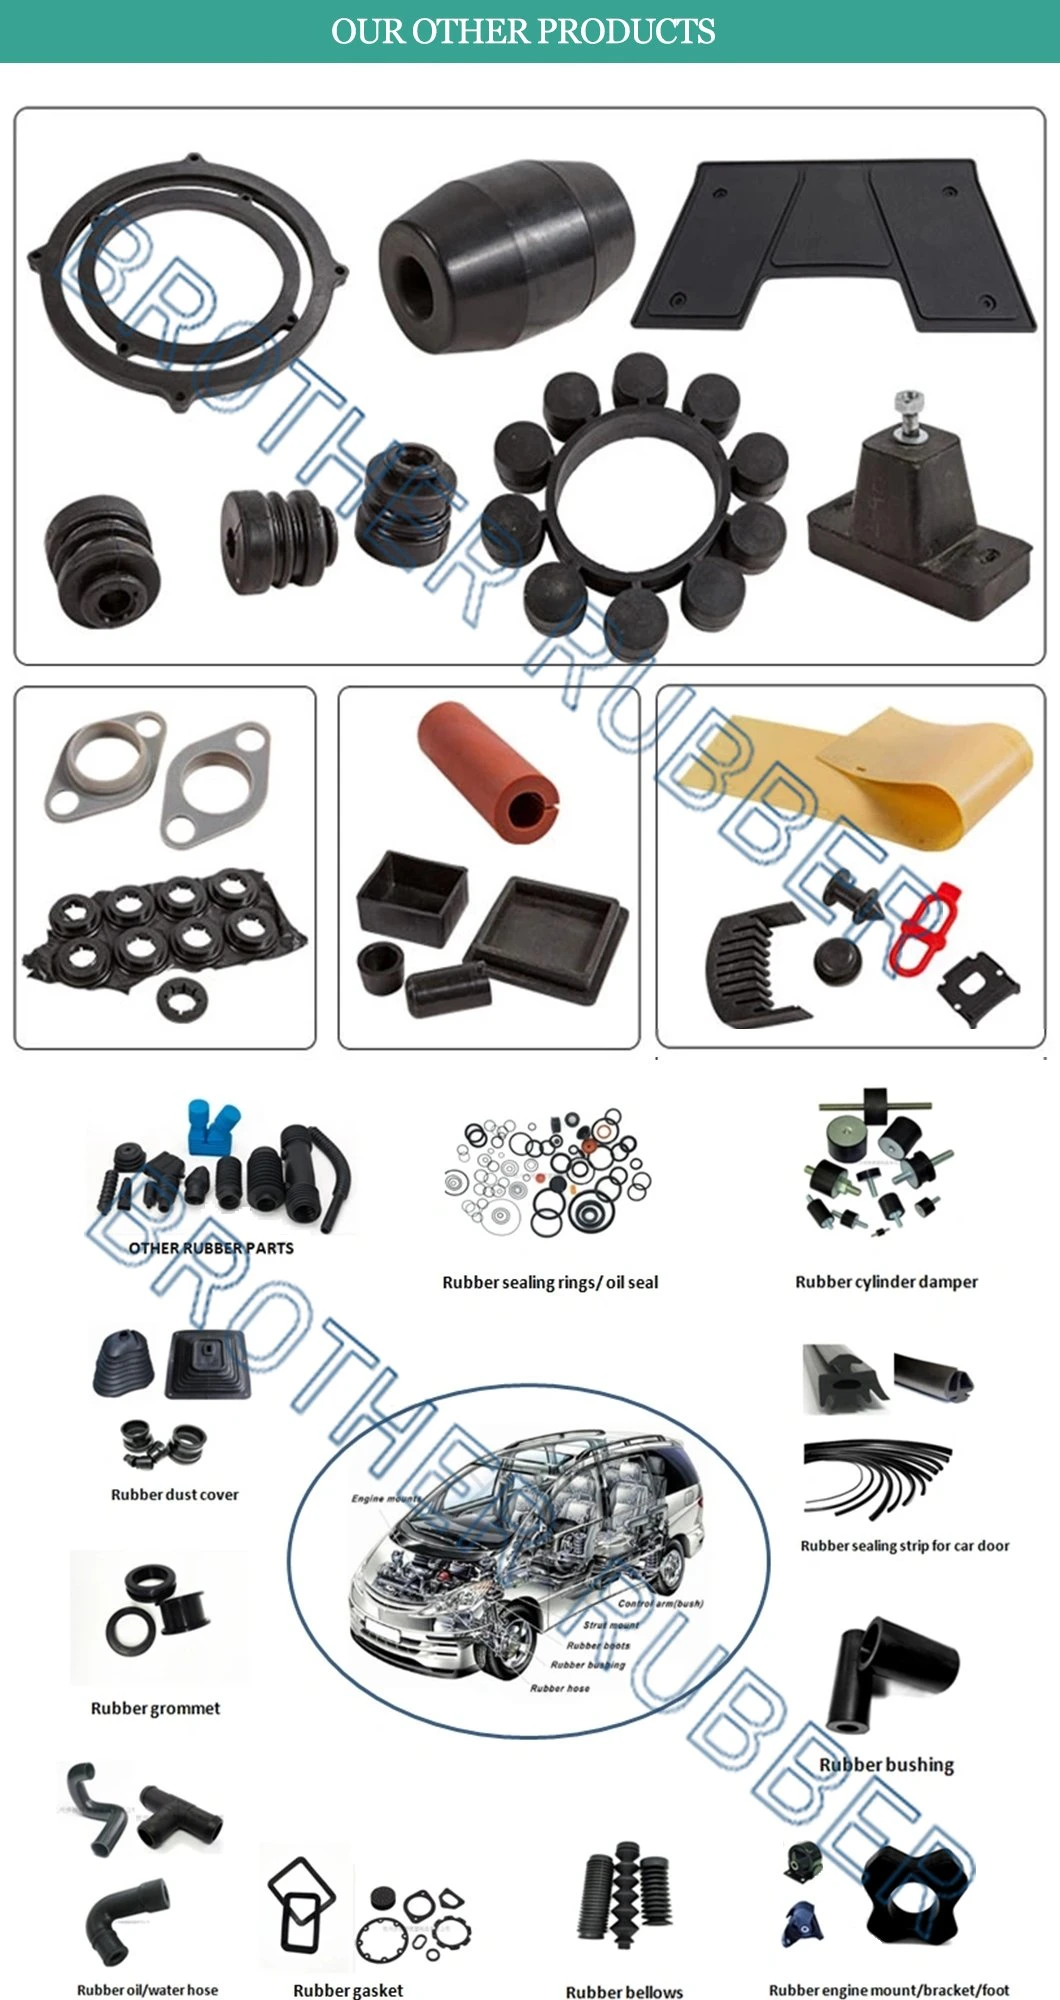 Rubber Engine Mount Generator Air Conditioner Anti Vibration Mountings Damper with Screw Rubber Engine Mount